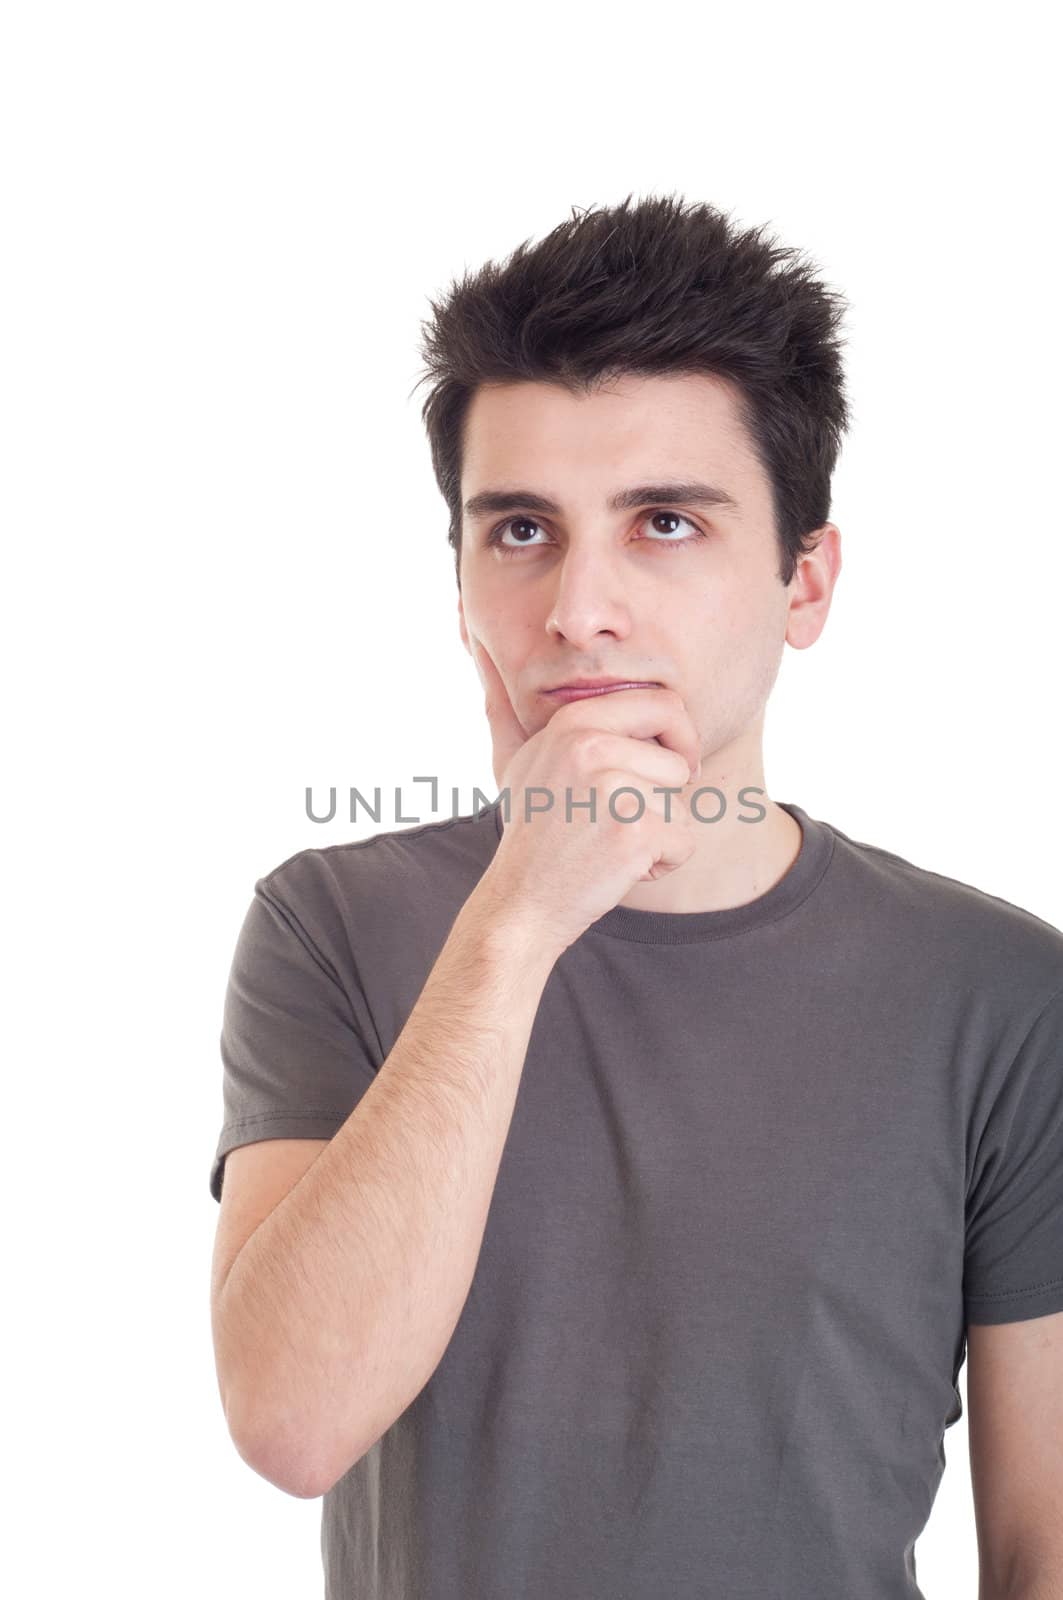 young casual man with a pensive expression isolated on white background